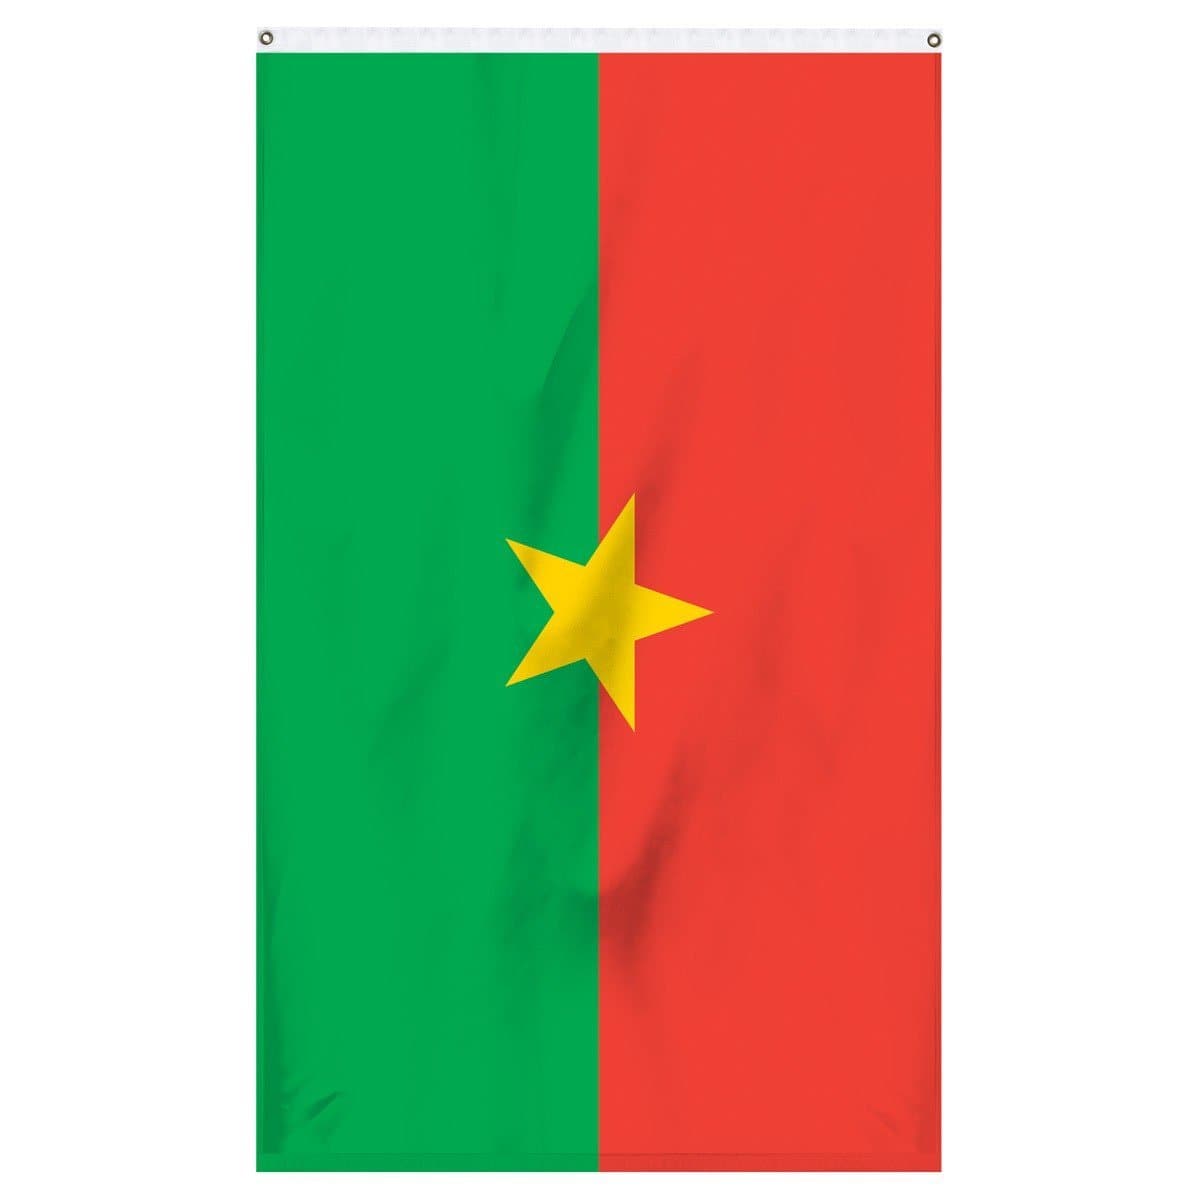 Burkina international flag for sale in America for flagpoles and parades